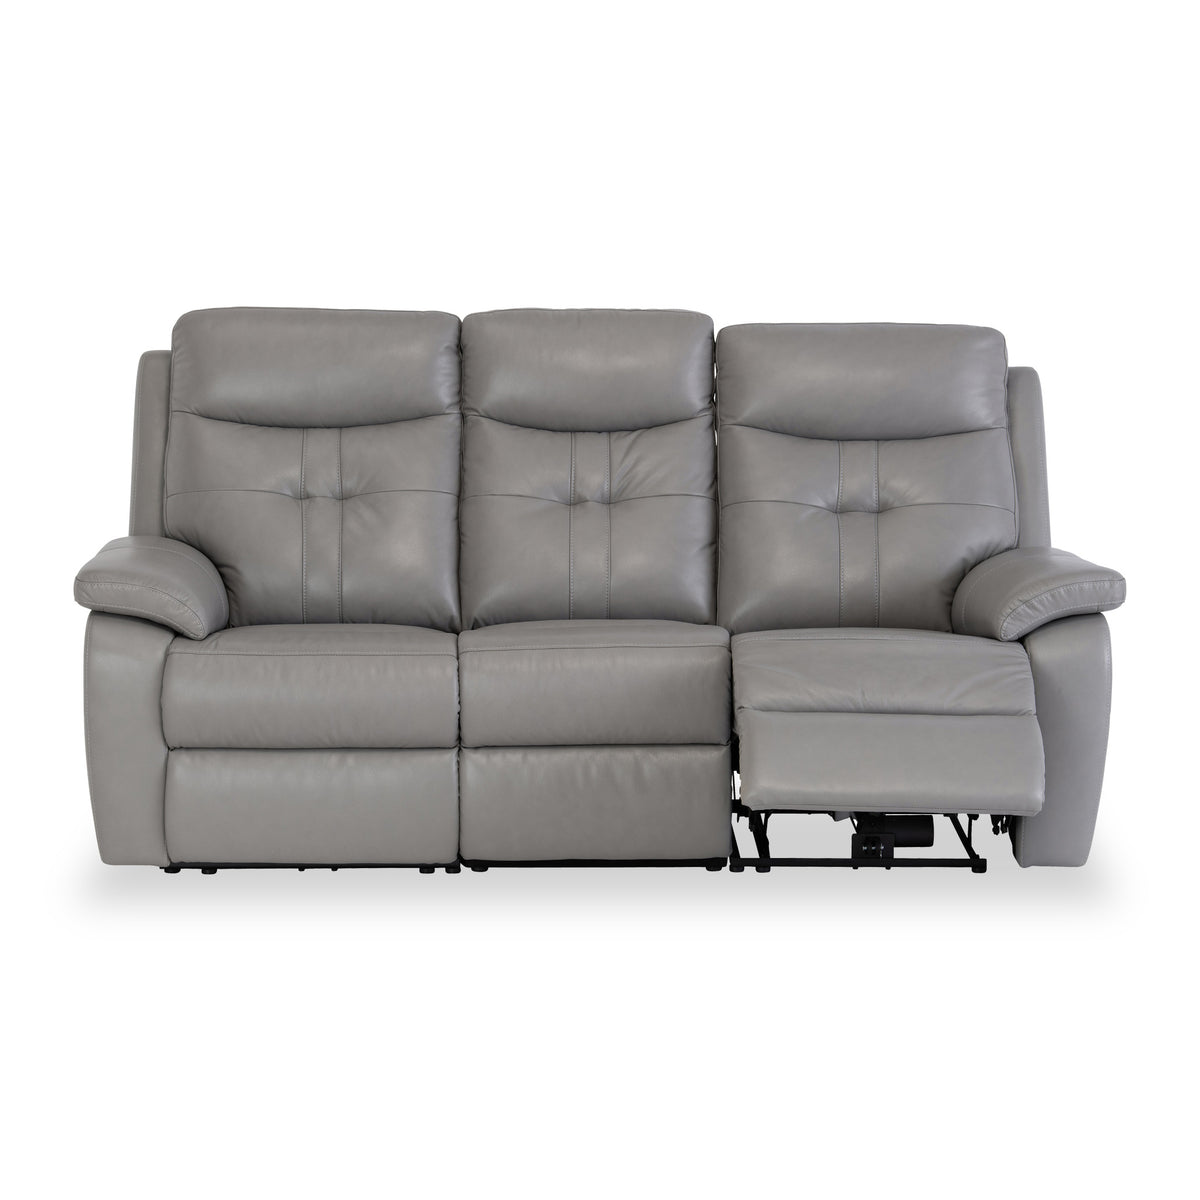 Talbot Grey Leather Electric Reclining 3 Seater Sofa from Roseland Furniture